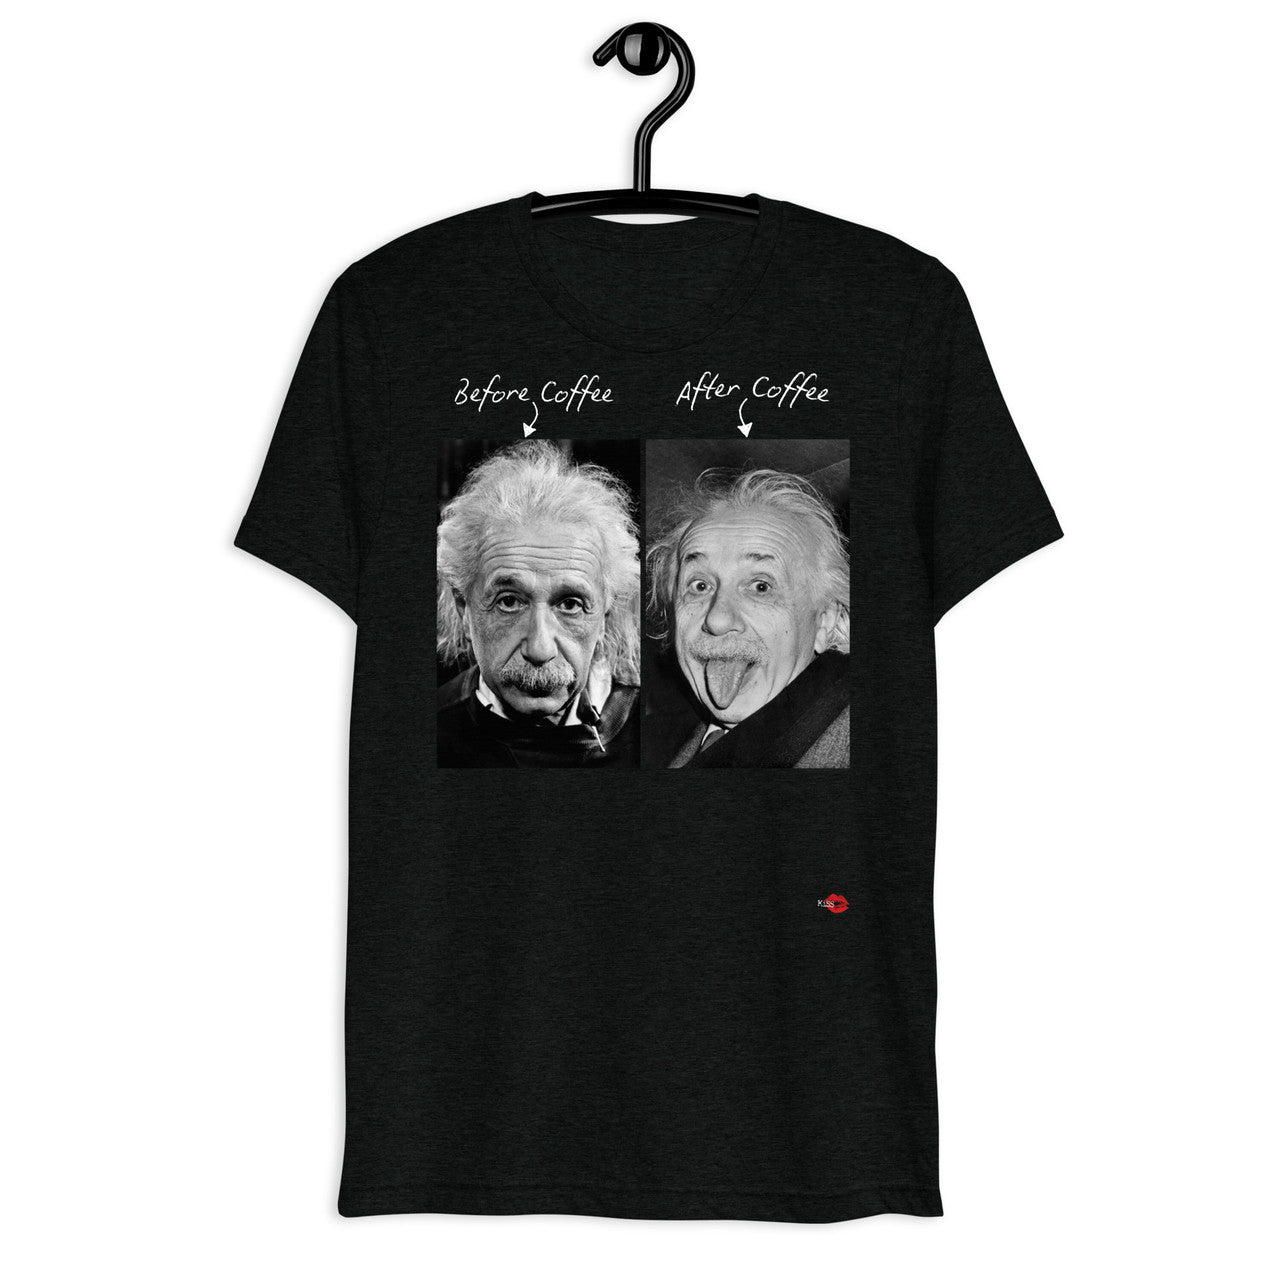 Albert Einstein Coffee KiSS Short sleeve t-shirt - Funny before and after